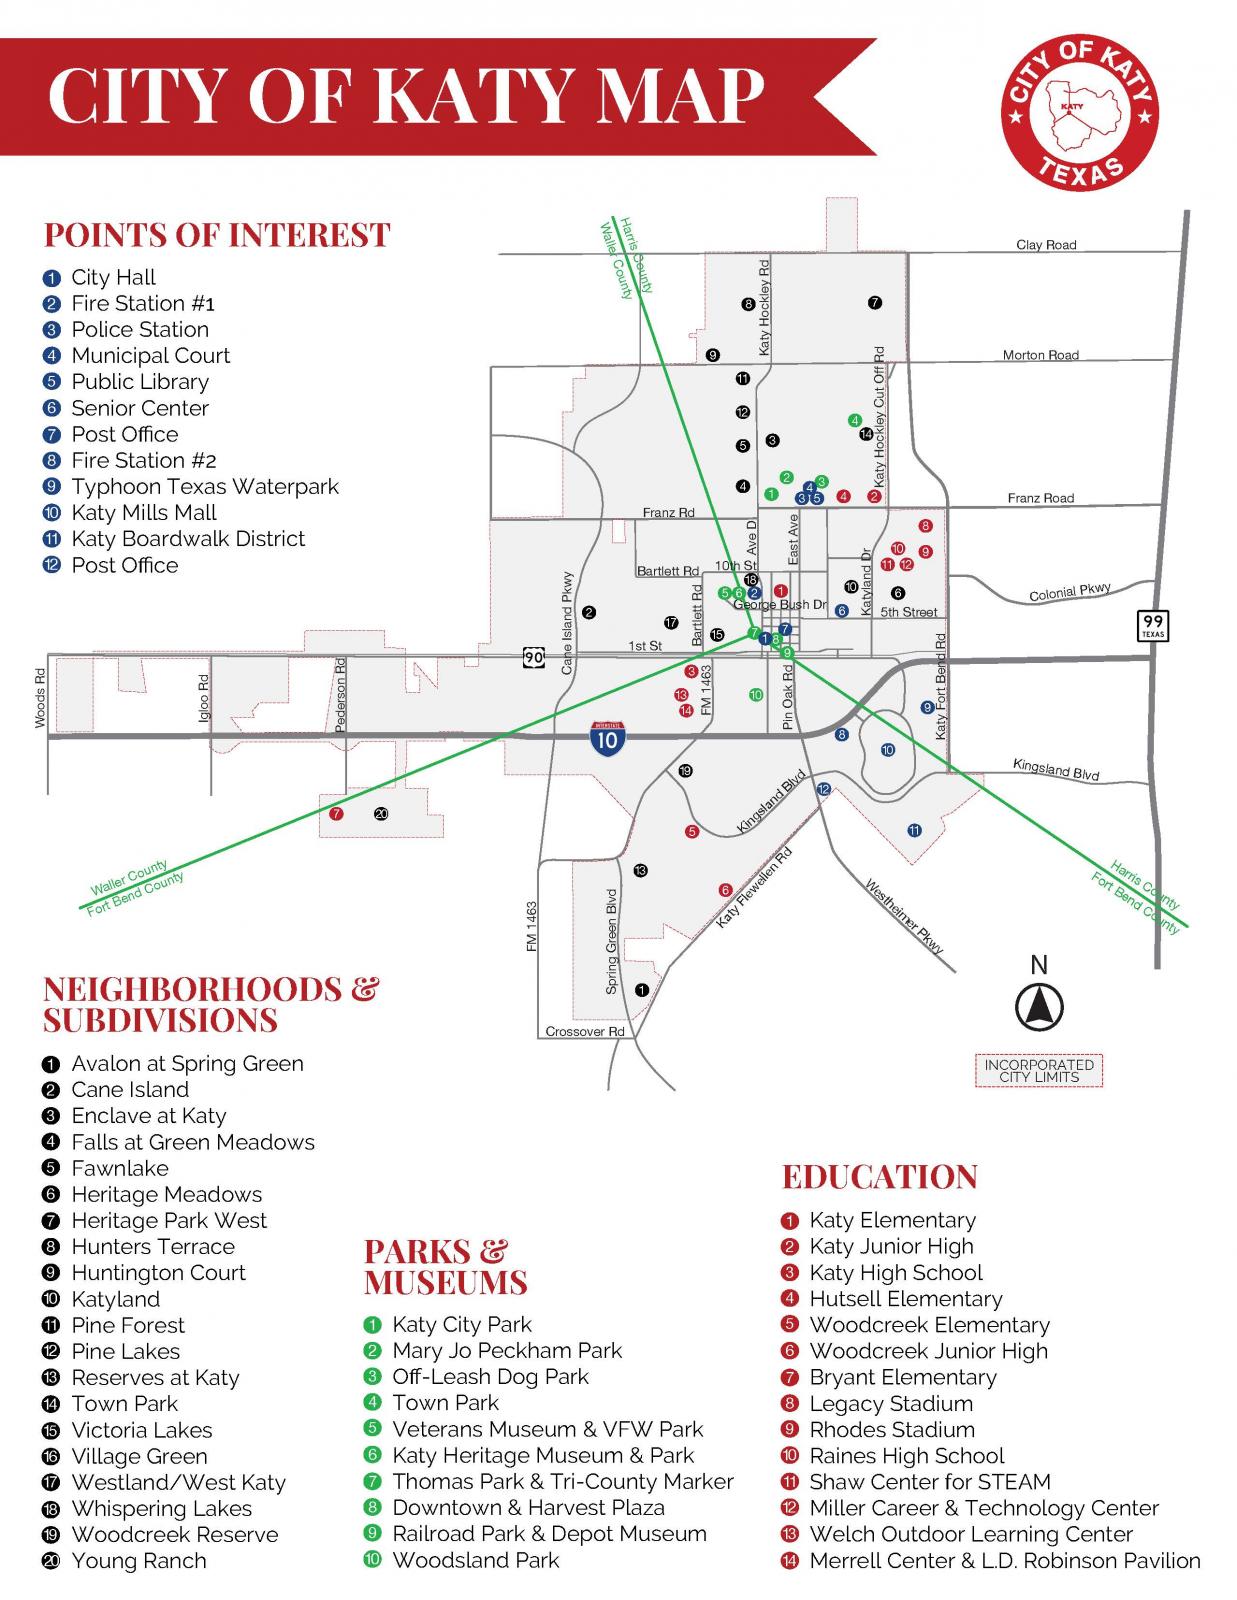 Click City of Katy Map to view more information